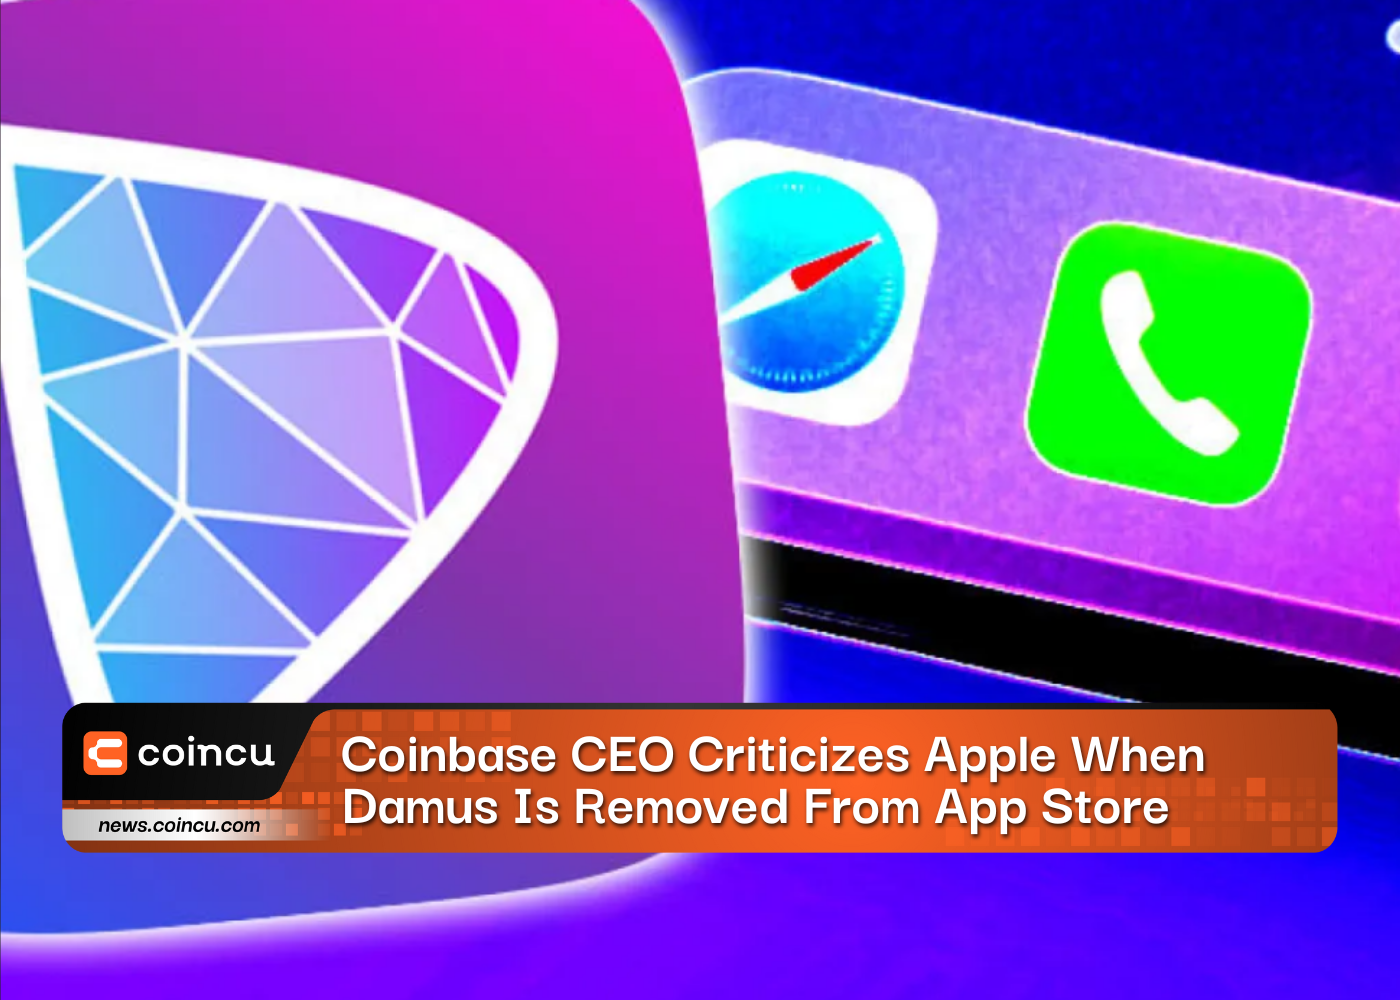 Coinbase CEO Criticizes Apple When Damus Is Removed From App Store